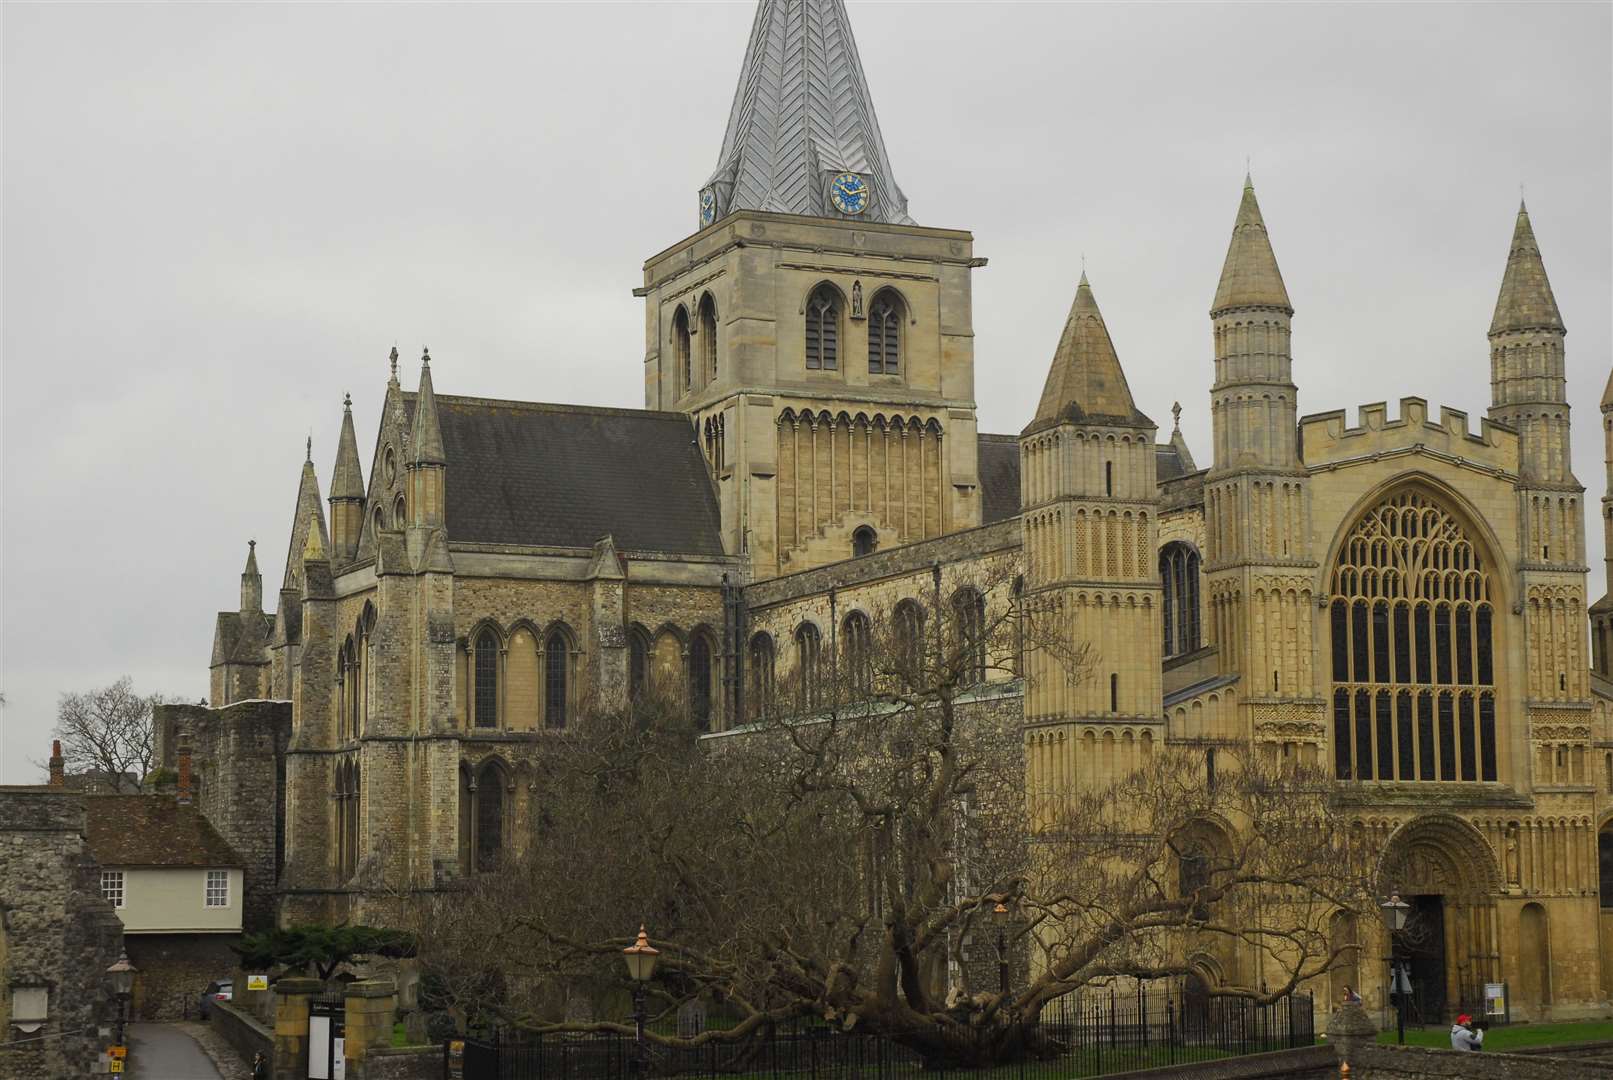 The 11th century Rochester Cathedral